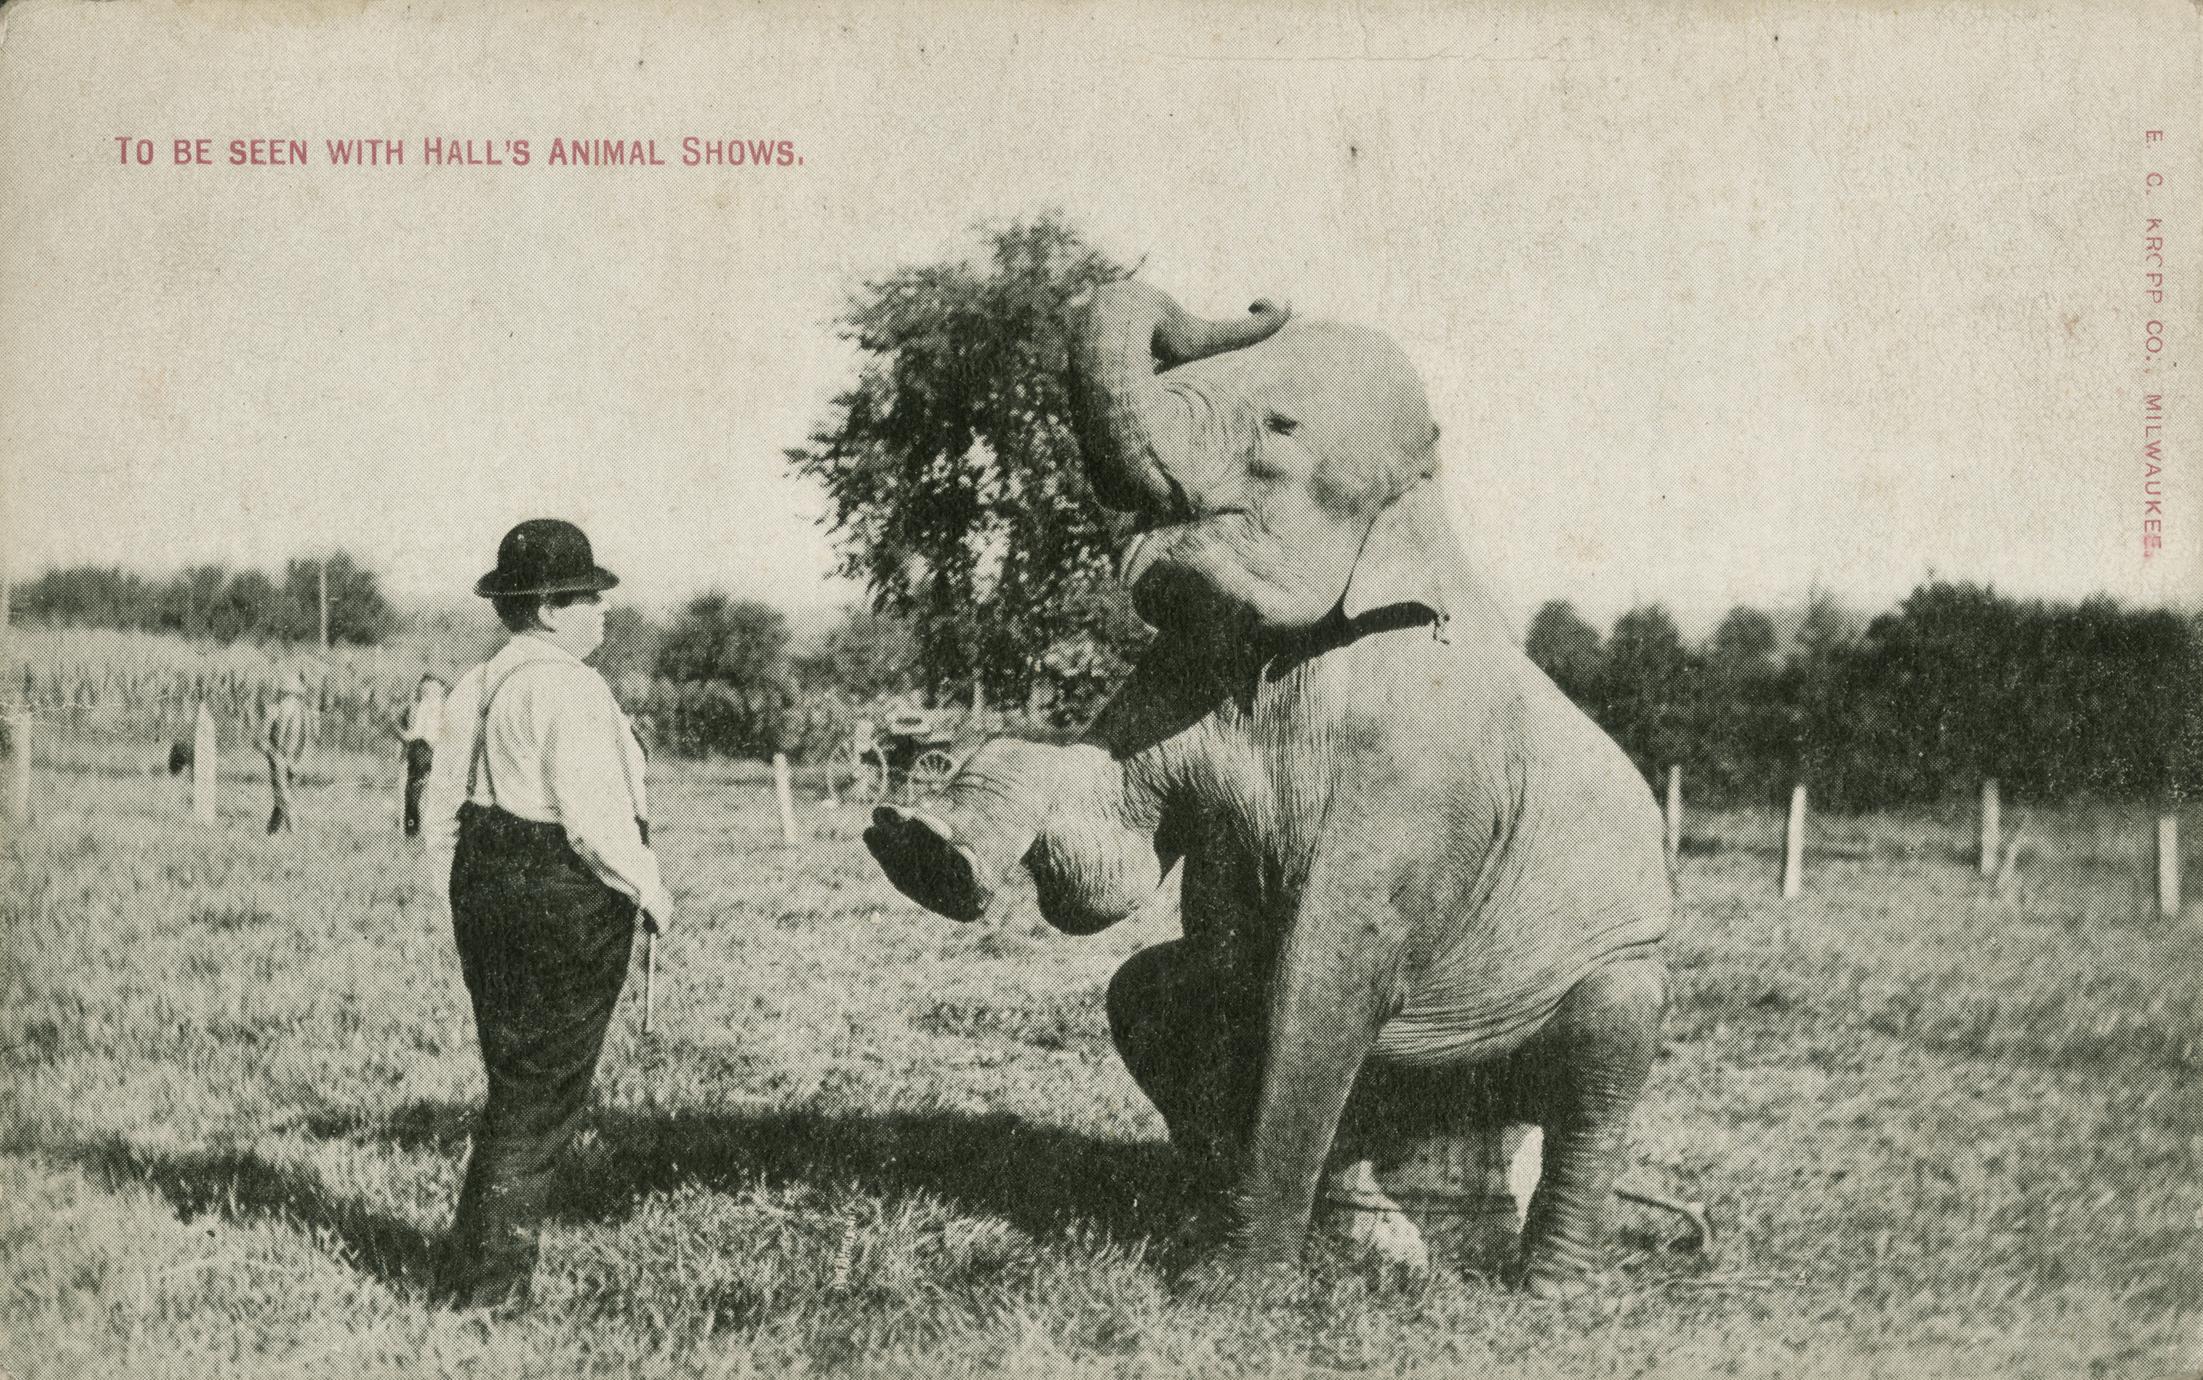 Circus elephant with trainer